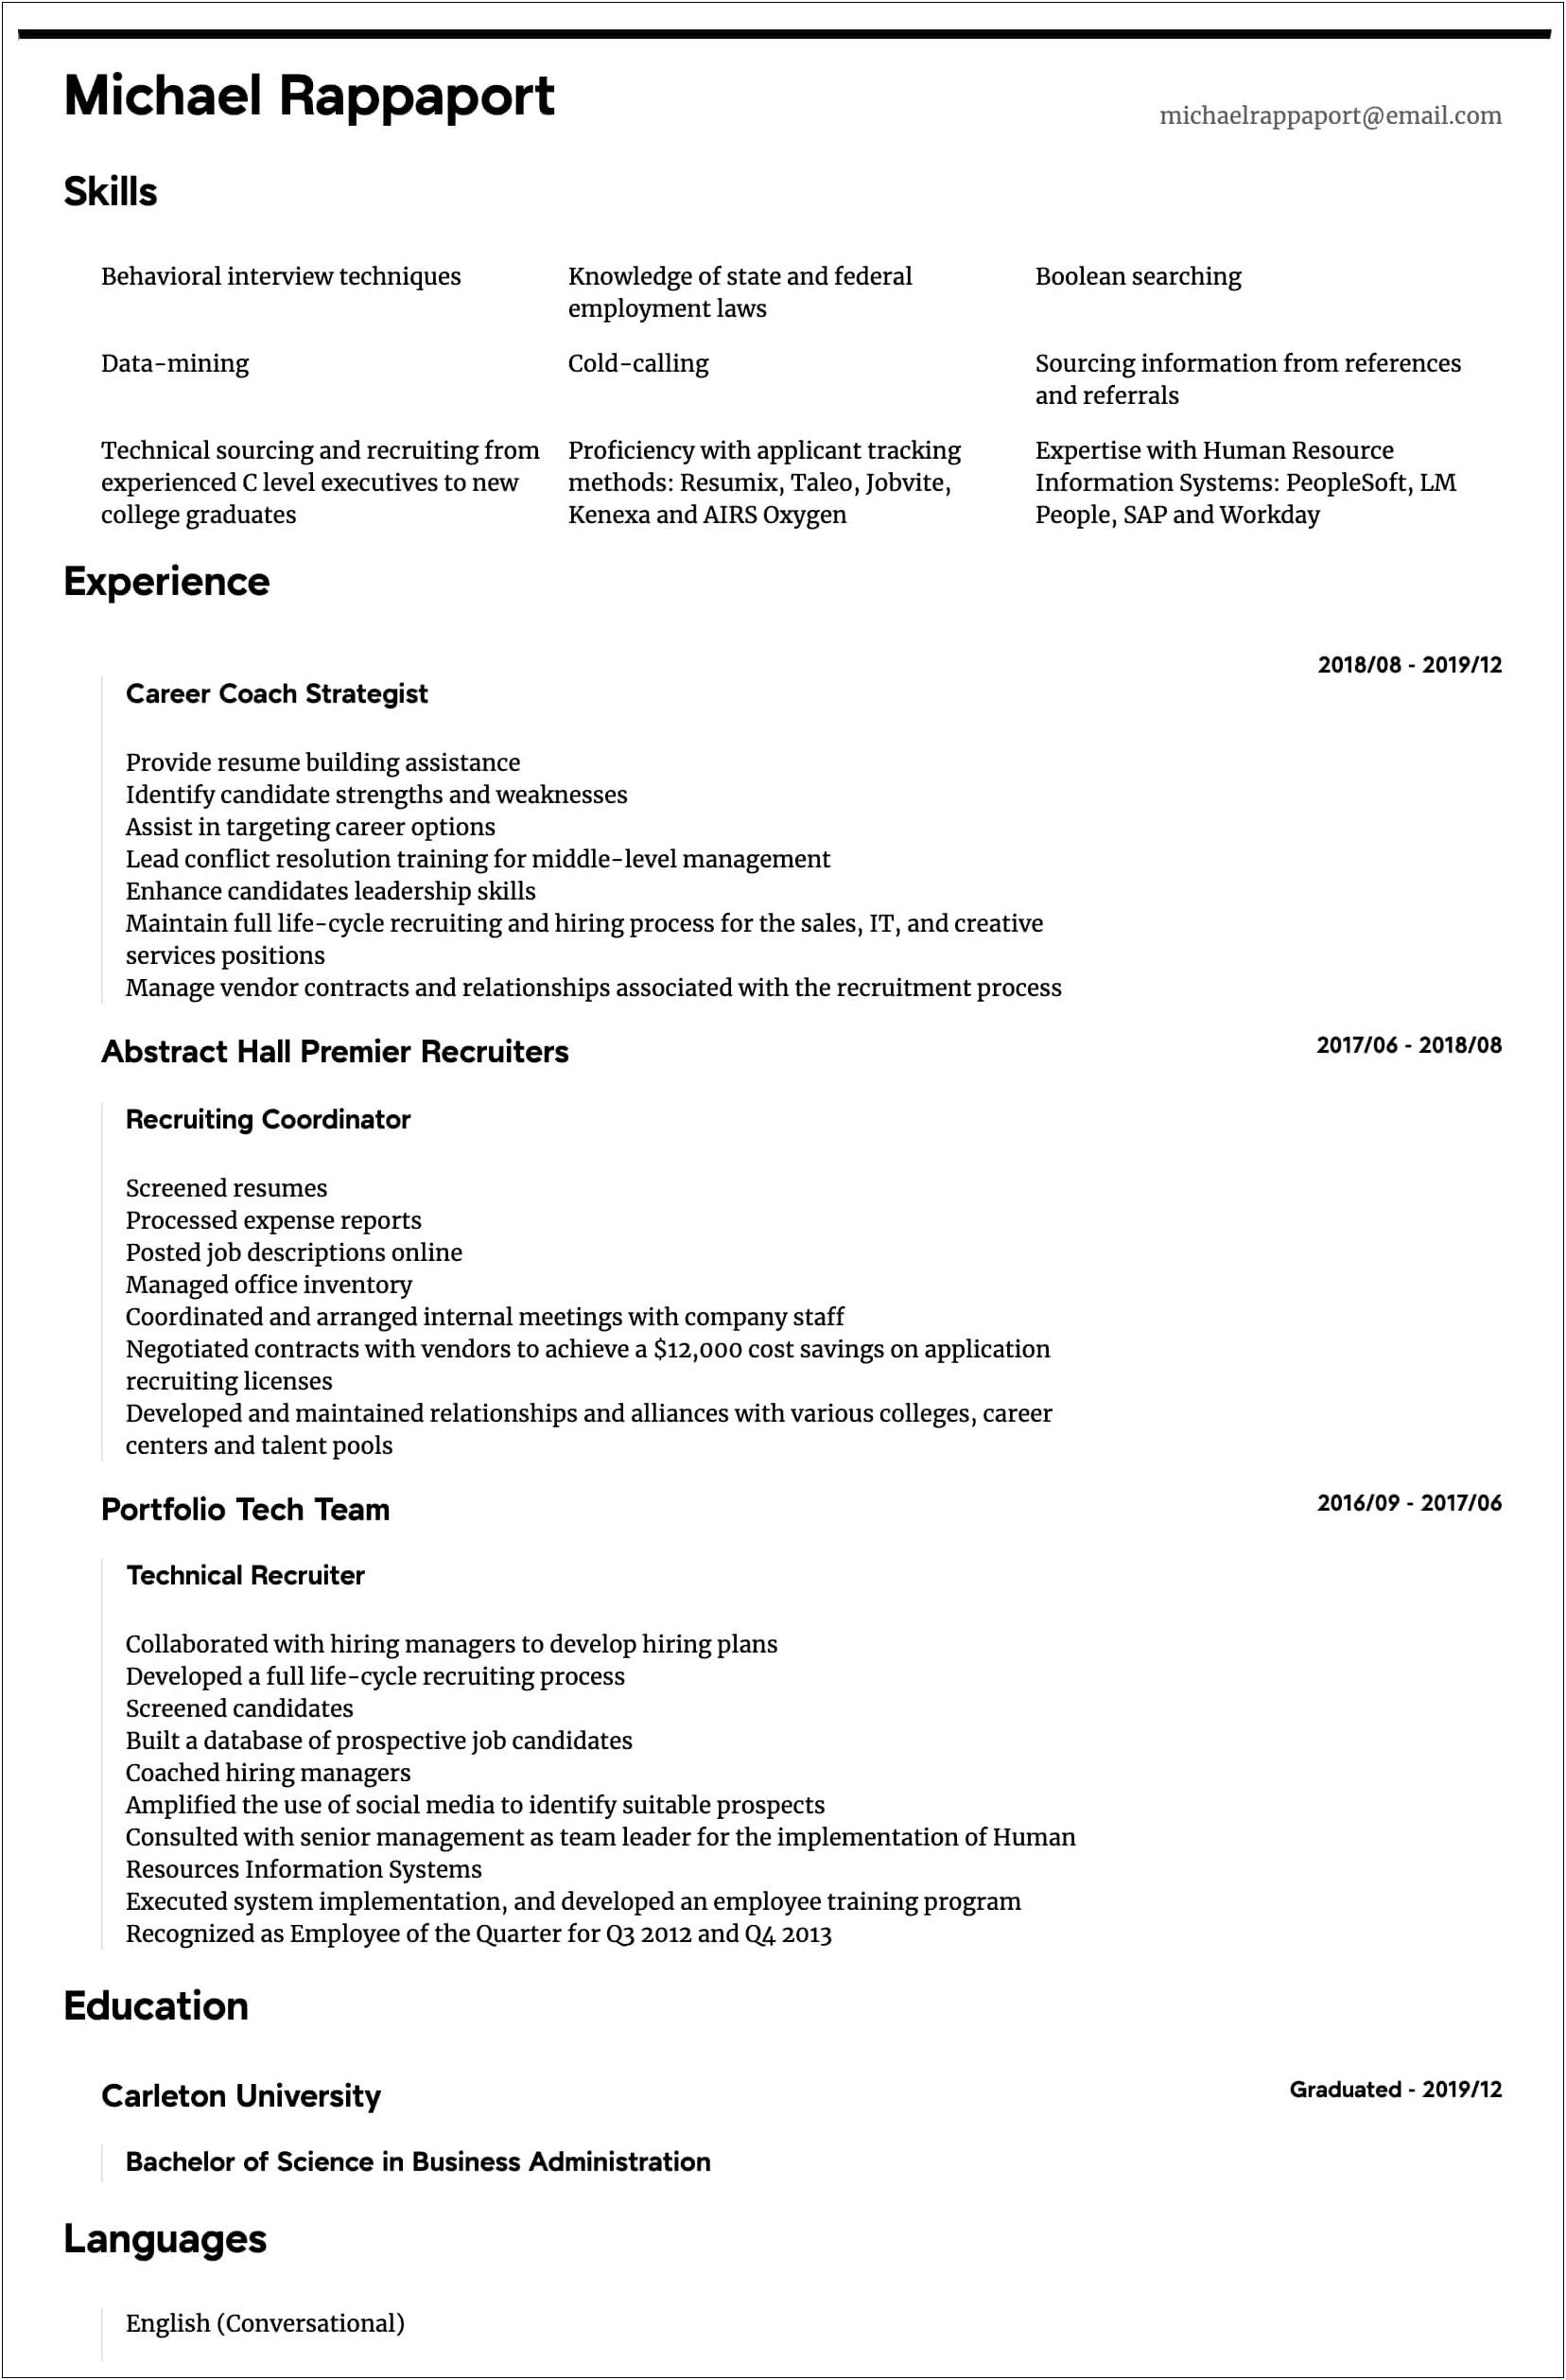 Talent Acquisition Manager Resume With Accomplishments